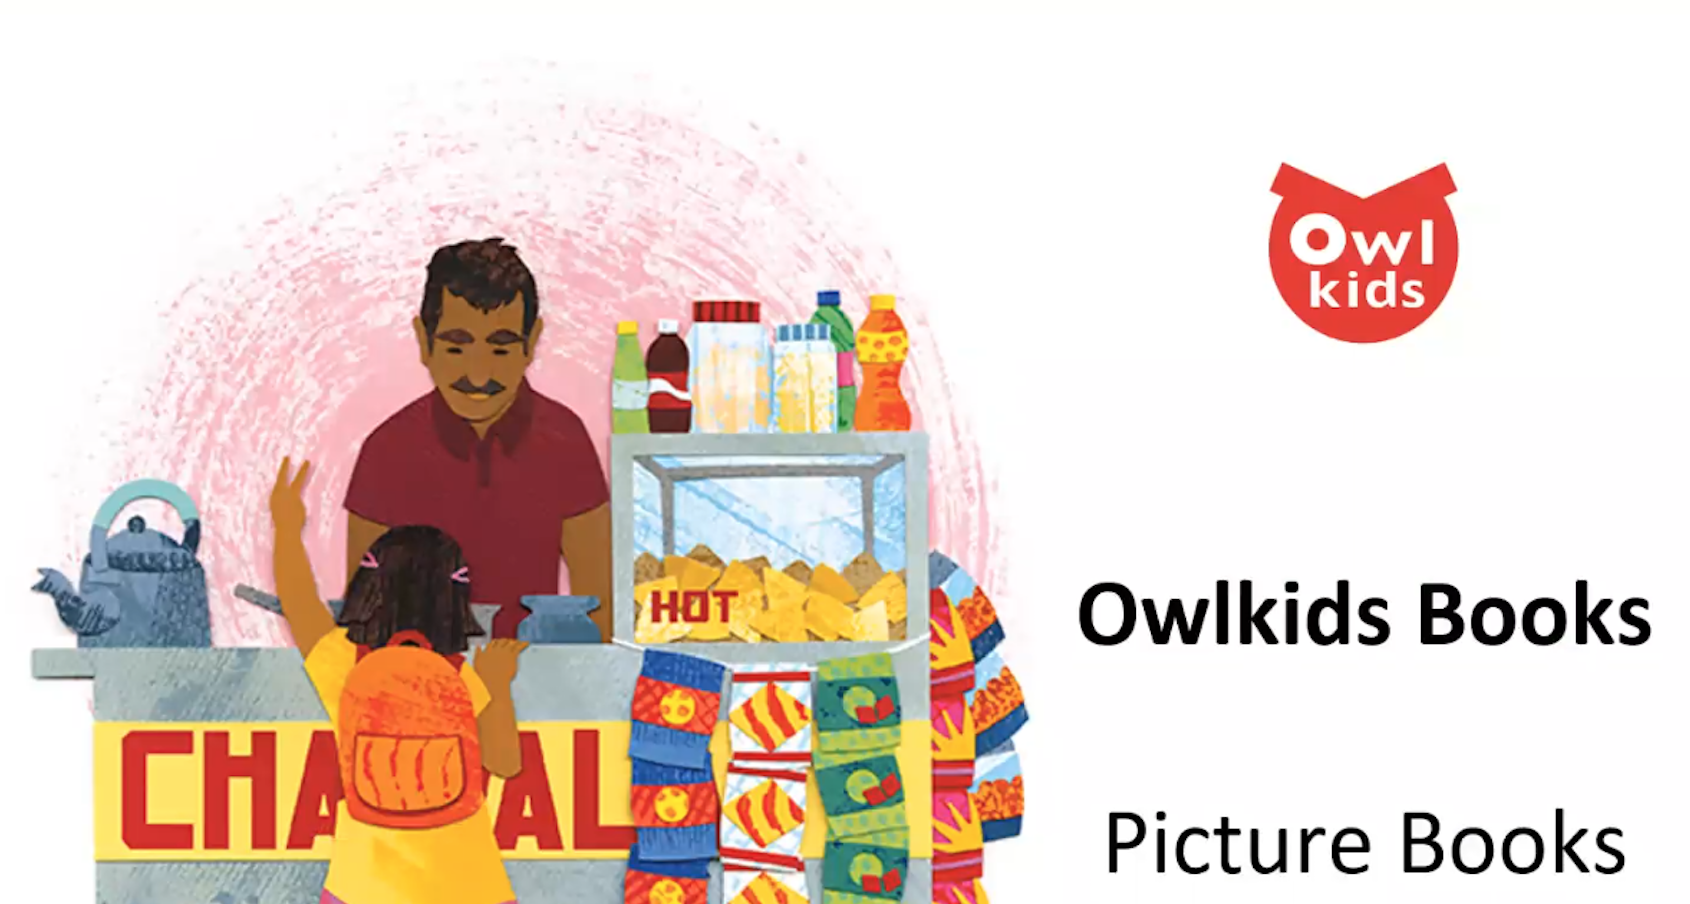 Owlkids Books picture books webinar cover slide with art from Chaiwala!